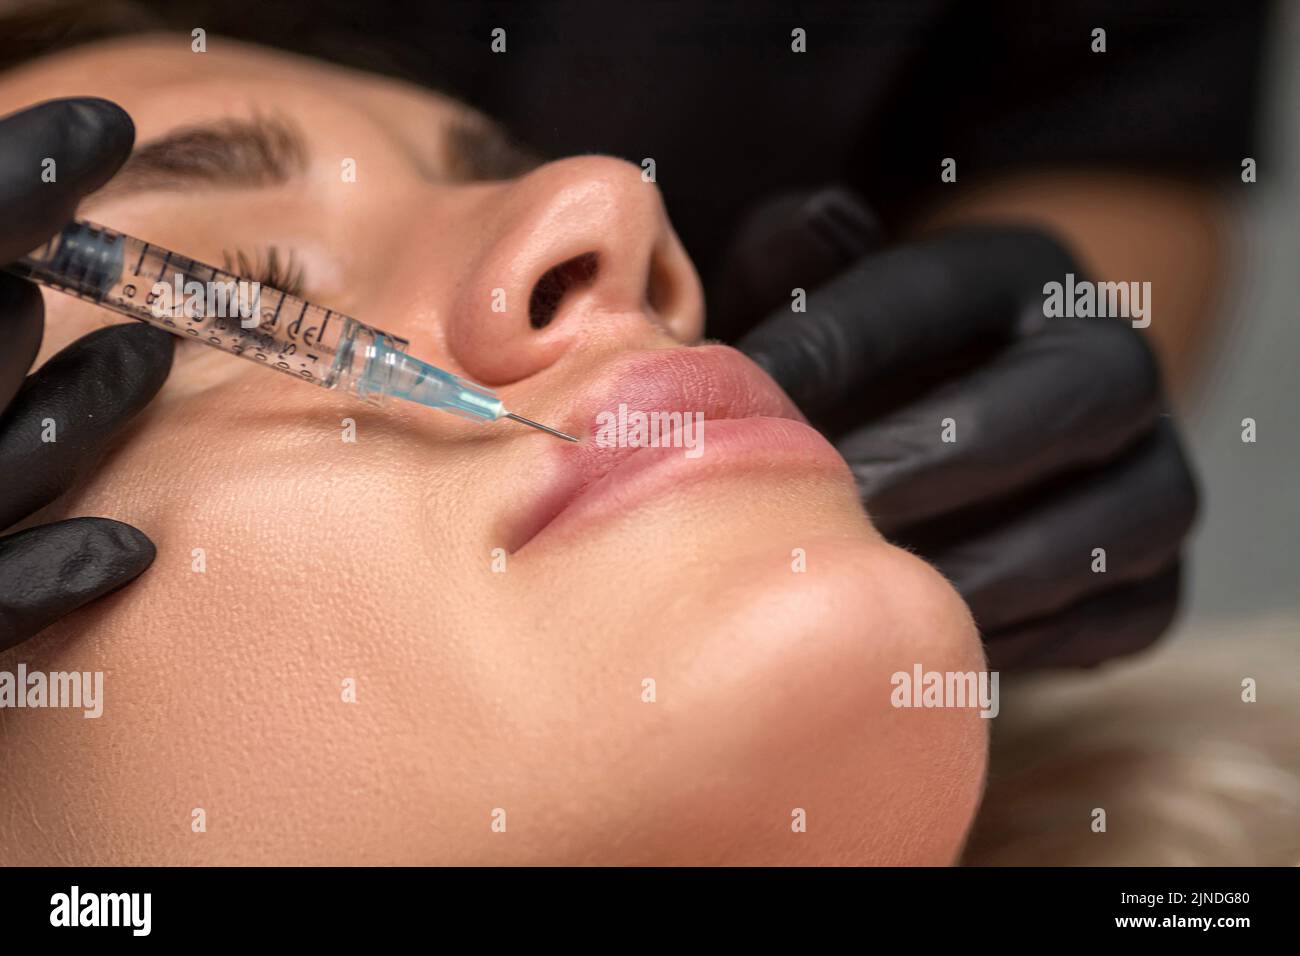 Woman getting cosmetic injection of botulinum to lips. Lip augmentation procedure in a beauty salon. Focus on lips Stock Photo